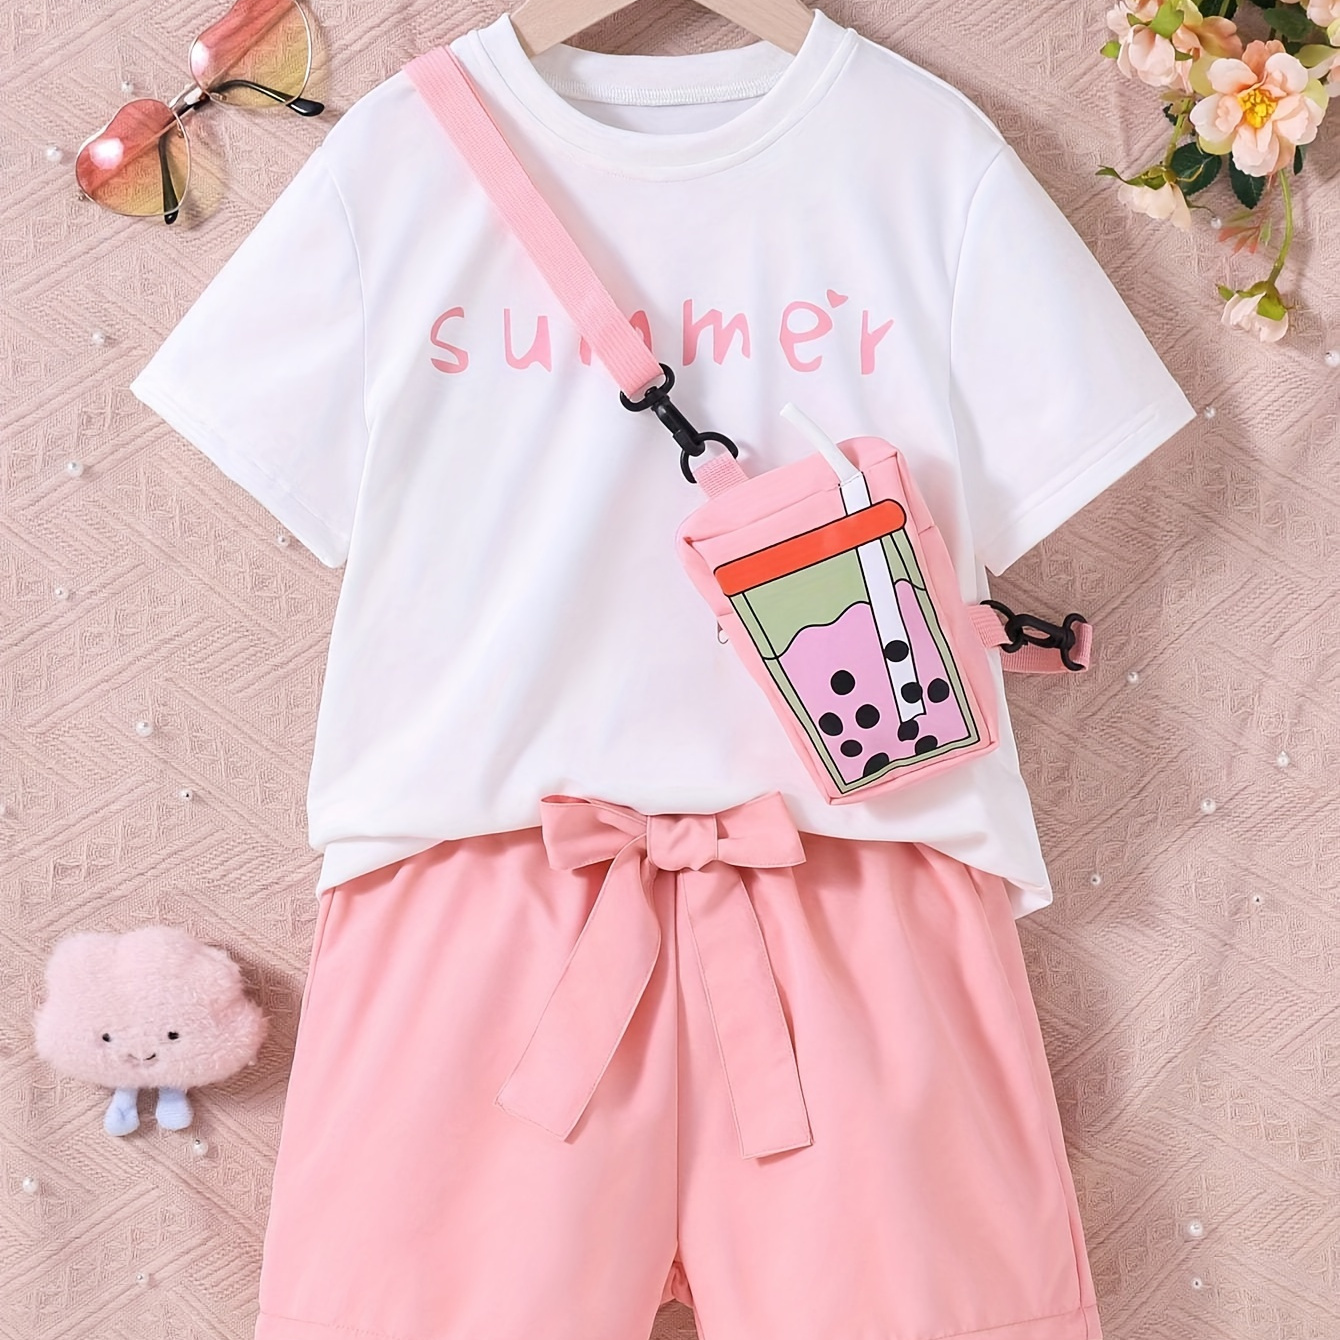 

4pcs, Summer Print Short Sleeve T-shirt + Solid Color Shorts + Belt + Drink Shaped Bag Set For Girls, Casual And Trendy Holiday Set Summer Gift, Girls' Clothing